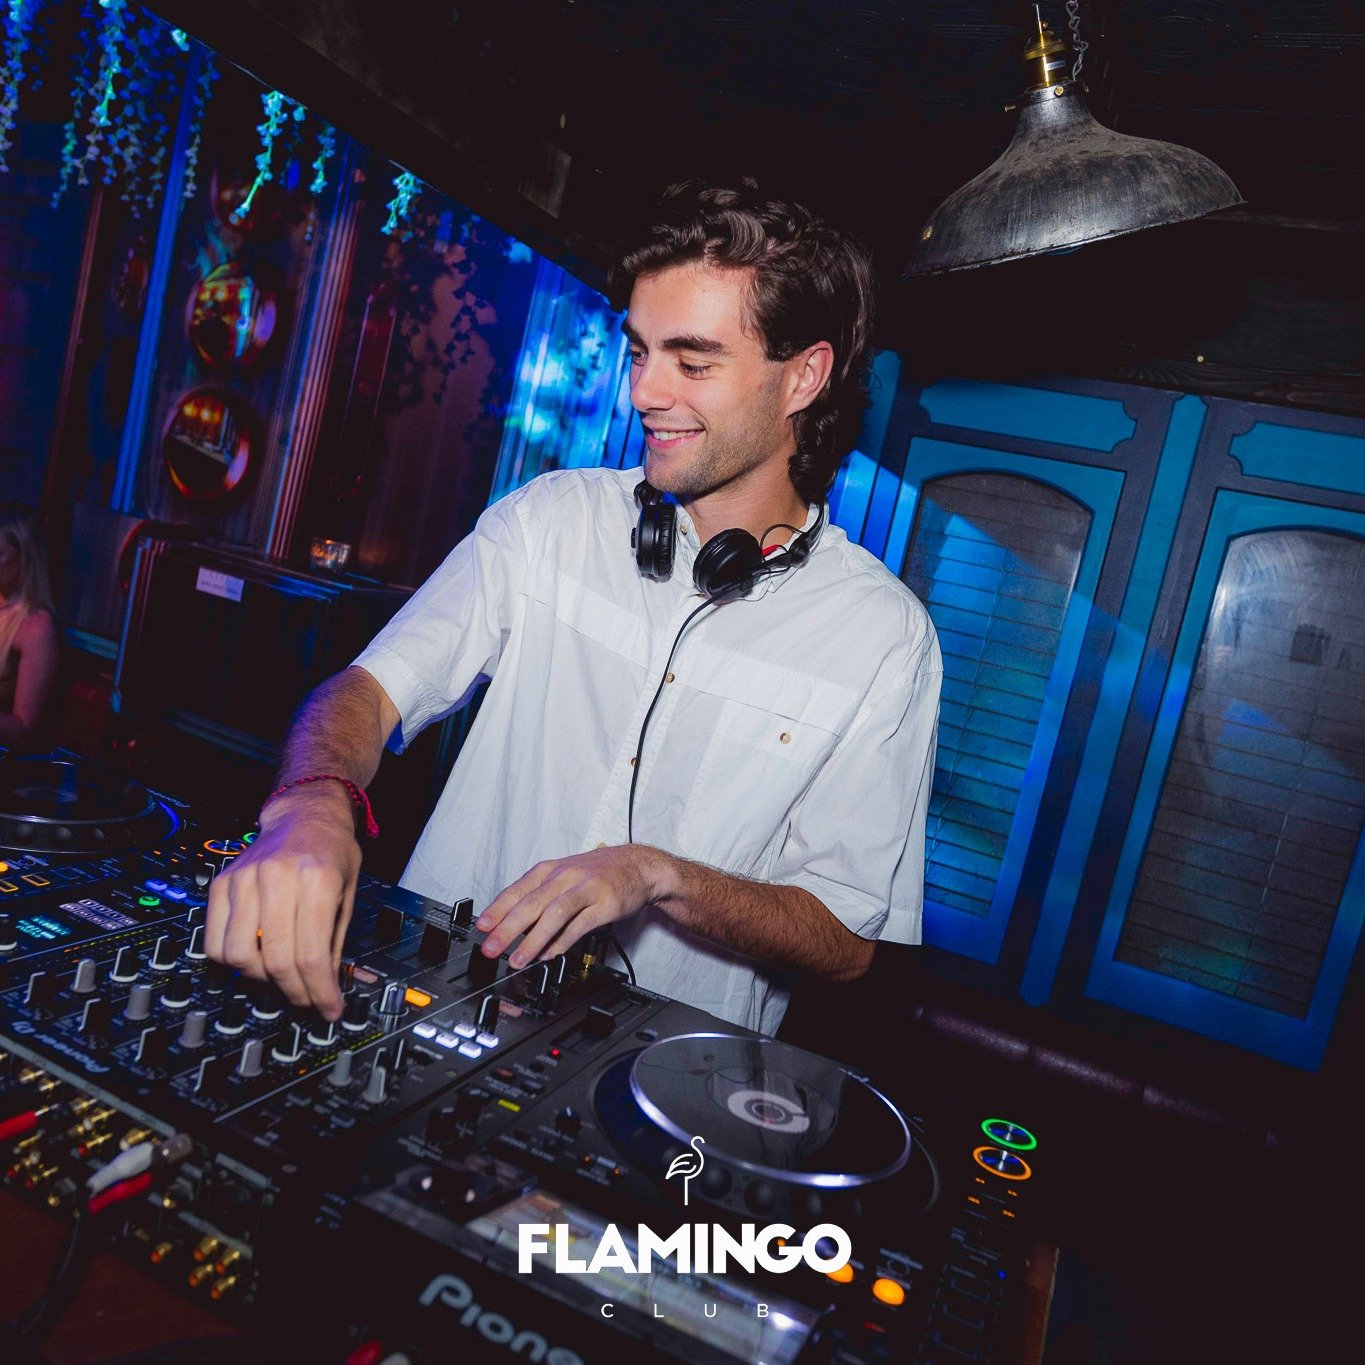 Tomorrow night, the music is ready and we&rsquo;re turning it up! 🎶 
Join us at Flamingo for an unforgettable evening spread over 2 epic levels, bringing all your favourite music genres.